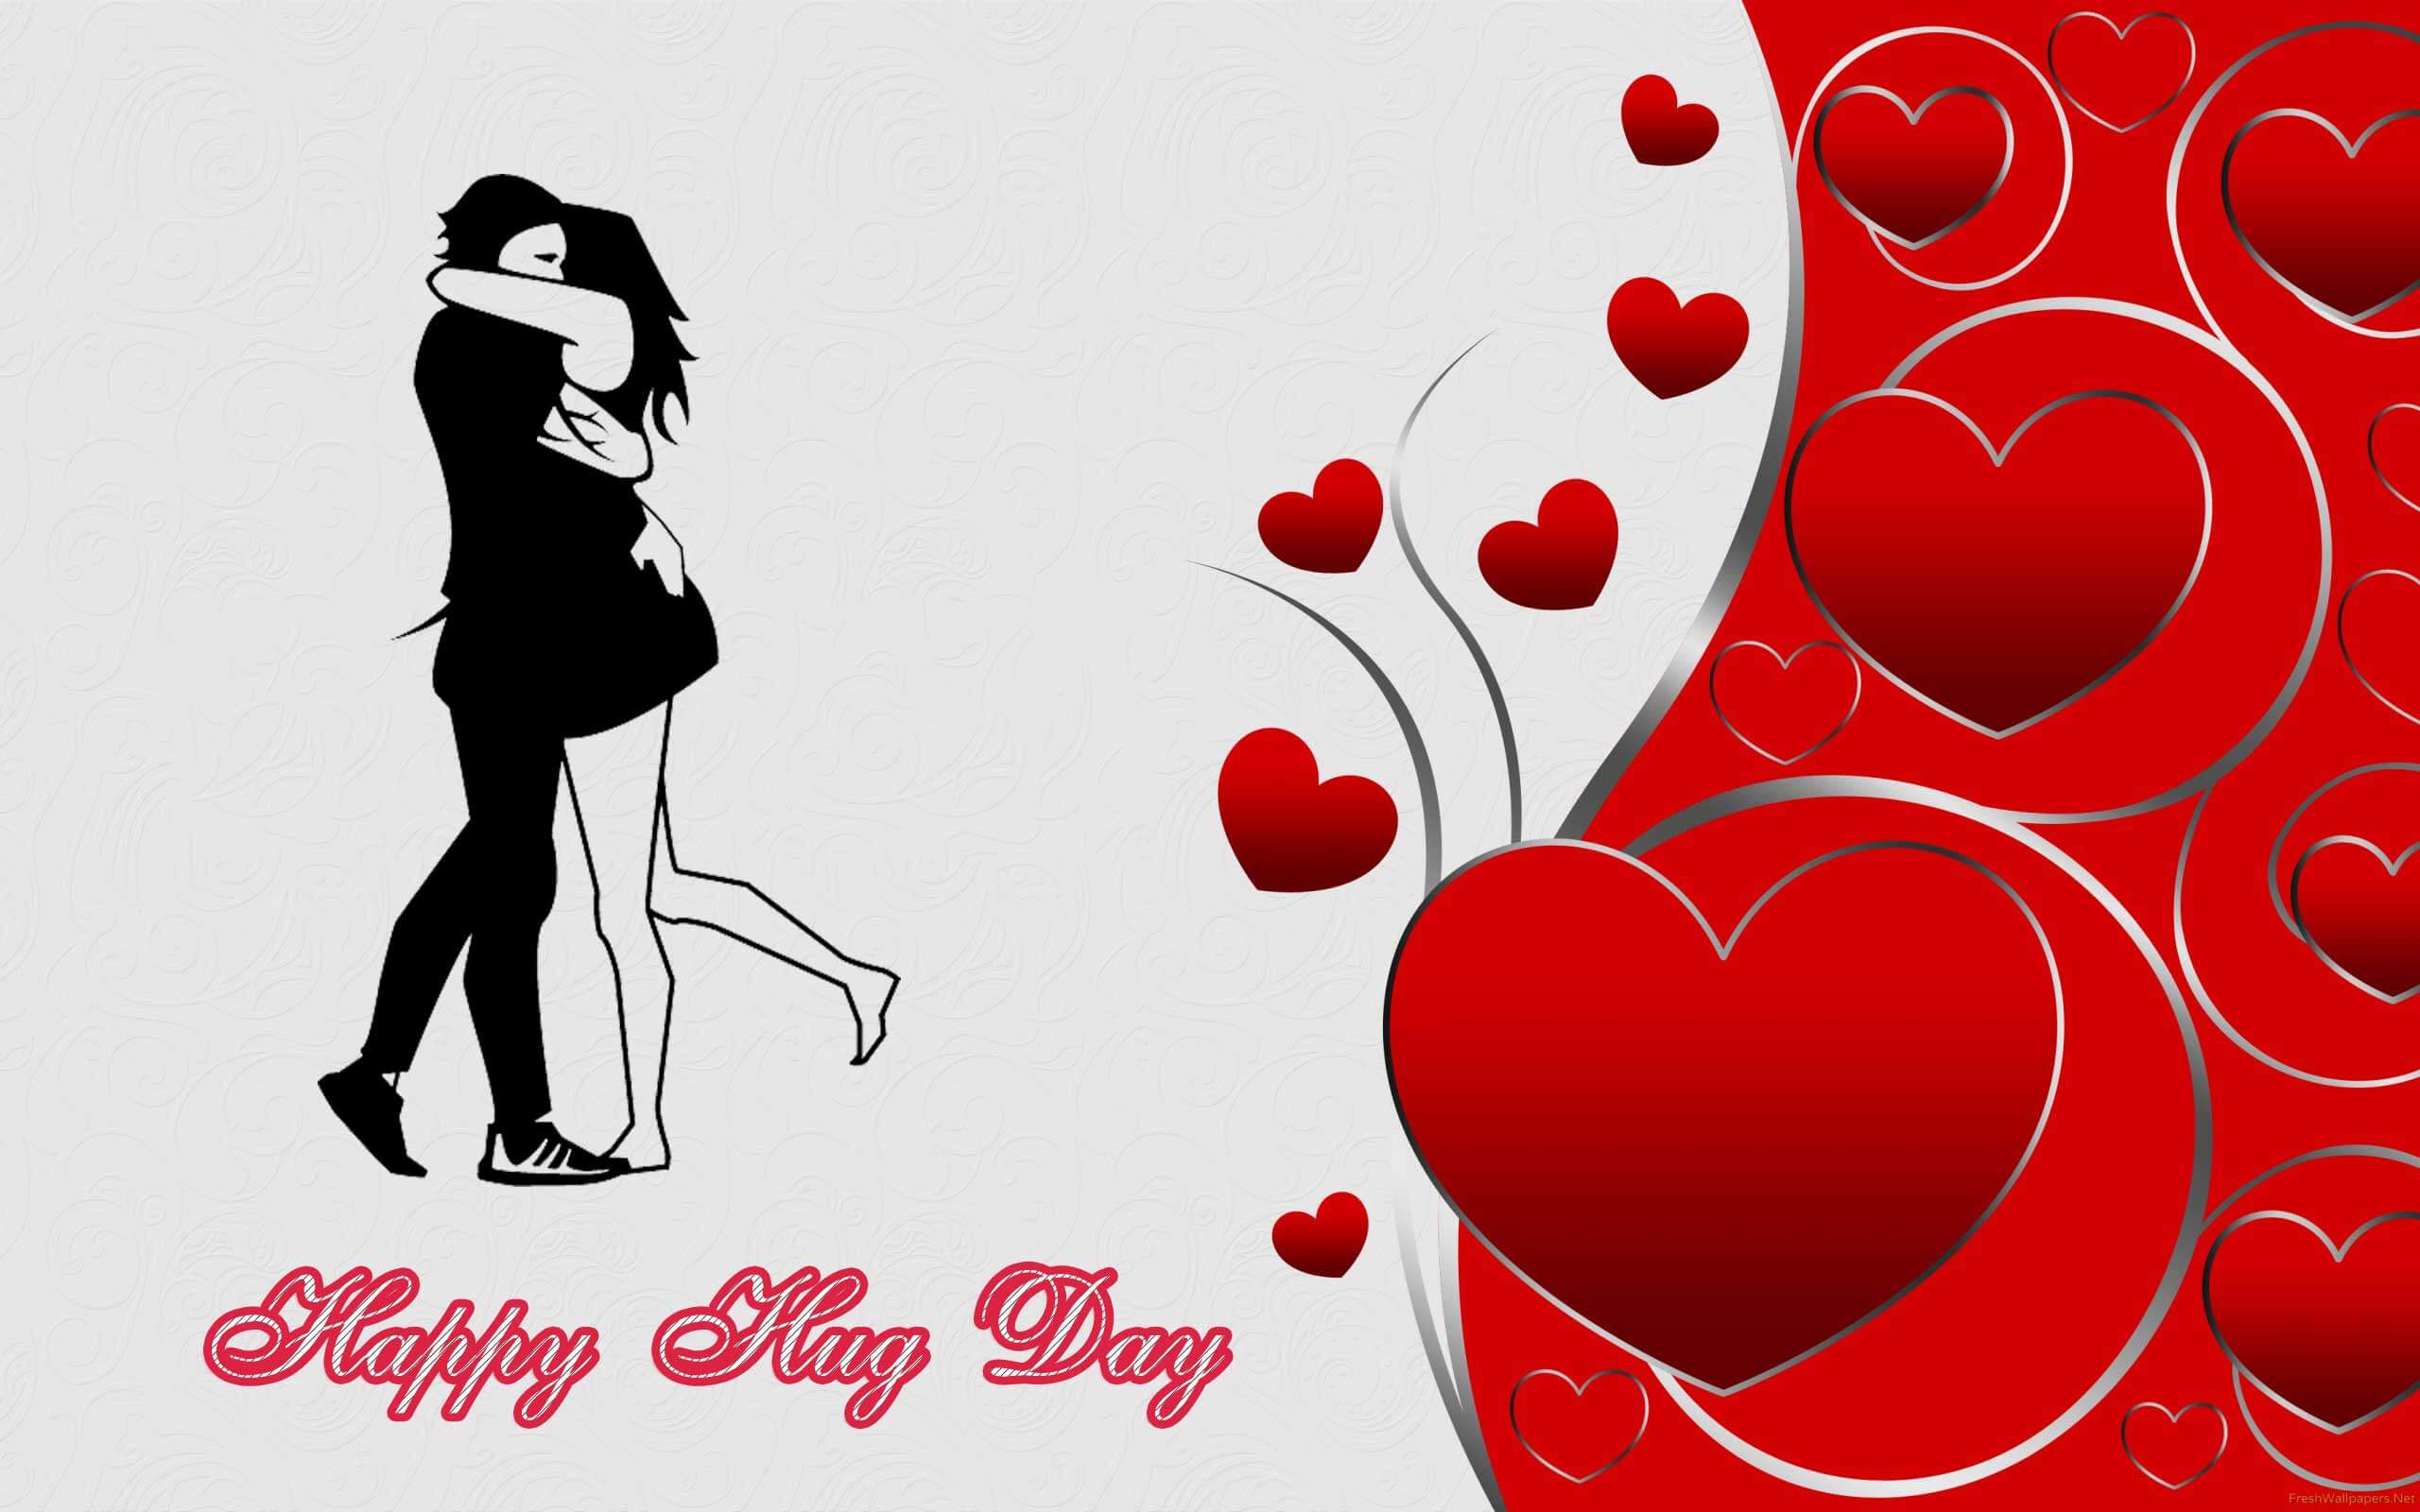 Happy Hug Day Wishes Love Romantic Couples Hearts Background Image Hd